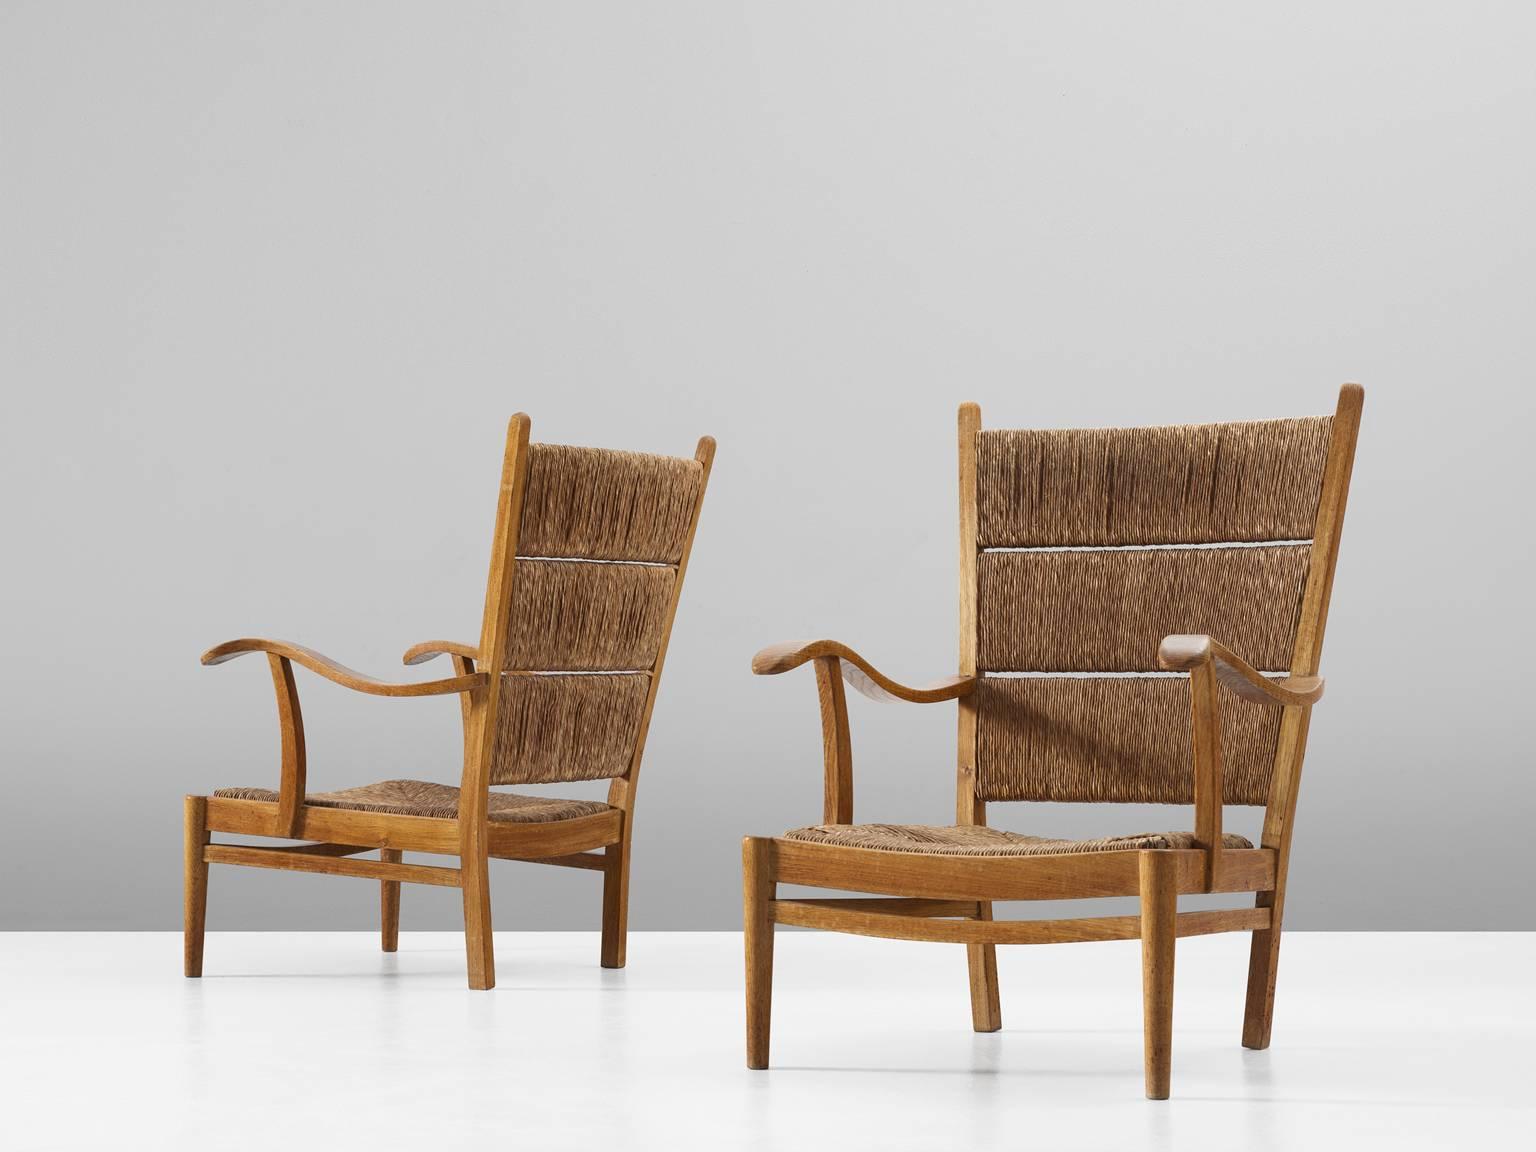 Pair of high back armchairs, in oak and paper-cord, by Bas Van Pelt for My Home, the Netherlands, 1940s.

Elegant pair of lounge chairs by Dutch designer Bas Van Pelt. These chairs have a royal and wide appearance, yet executed in natural